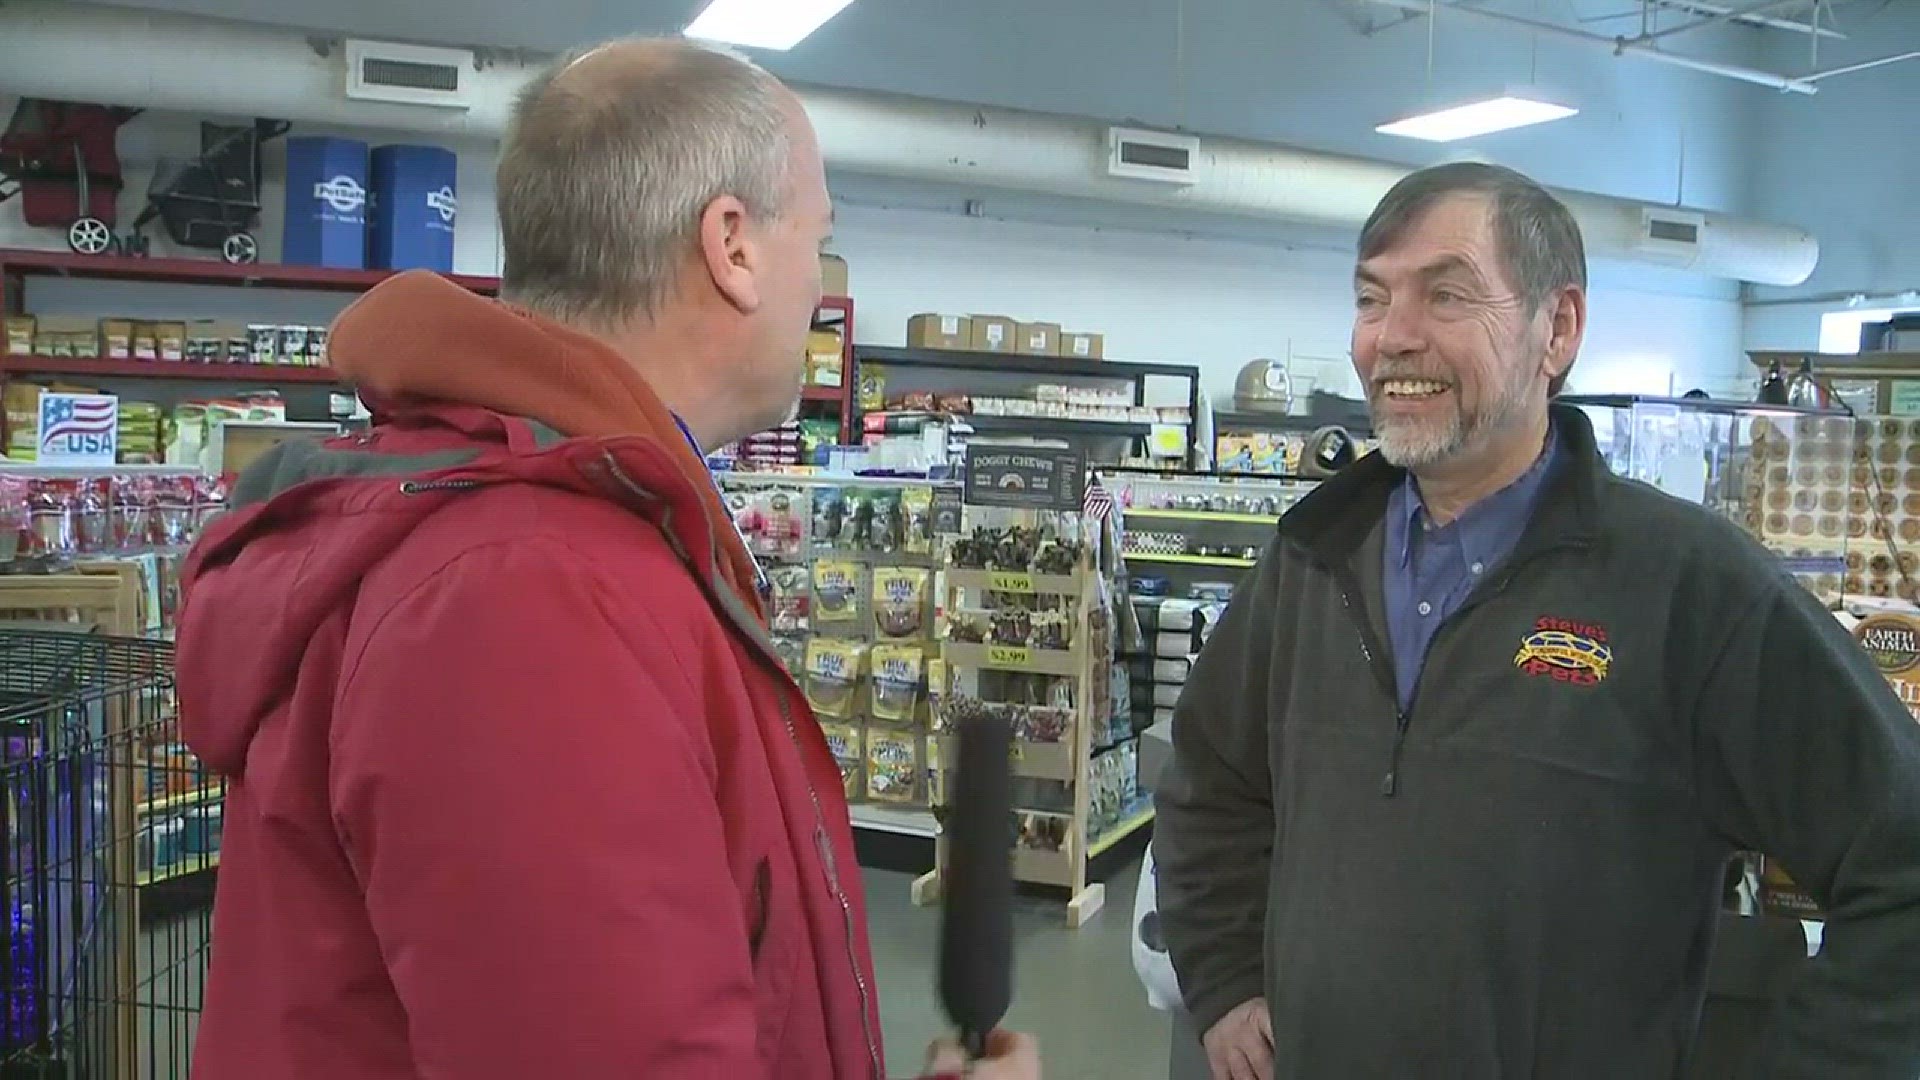 Dave McKinley interviewed Steve Lane from Steve's Wonderful World of Pets in Williamsville about the controversy.